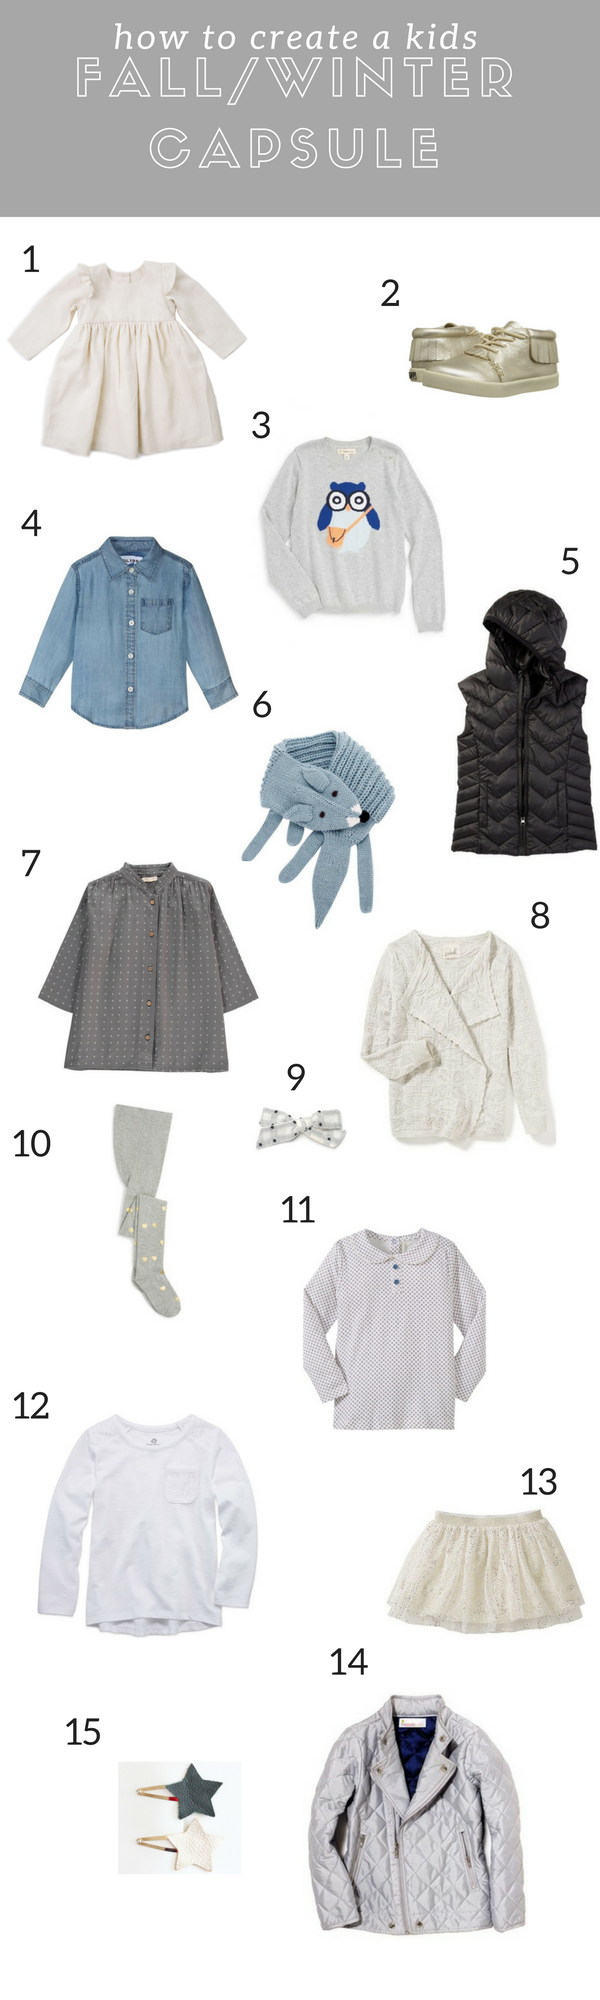 How to Create a Capsule Wardrobe for Kids This Fall and Winter